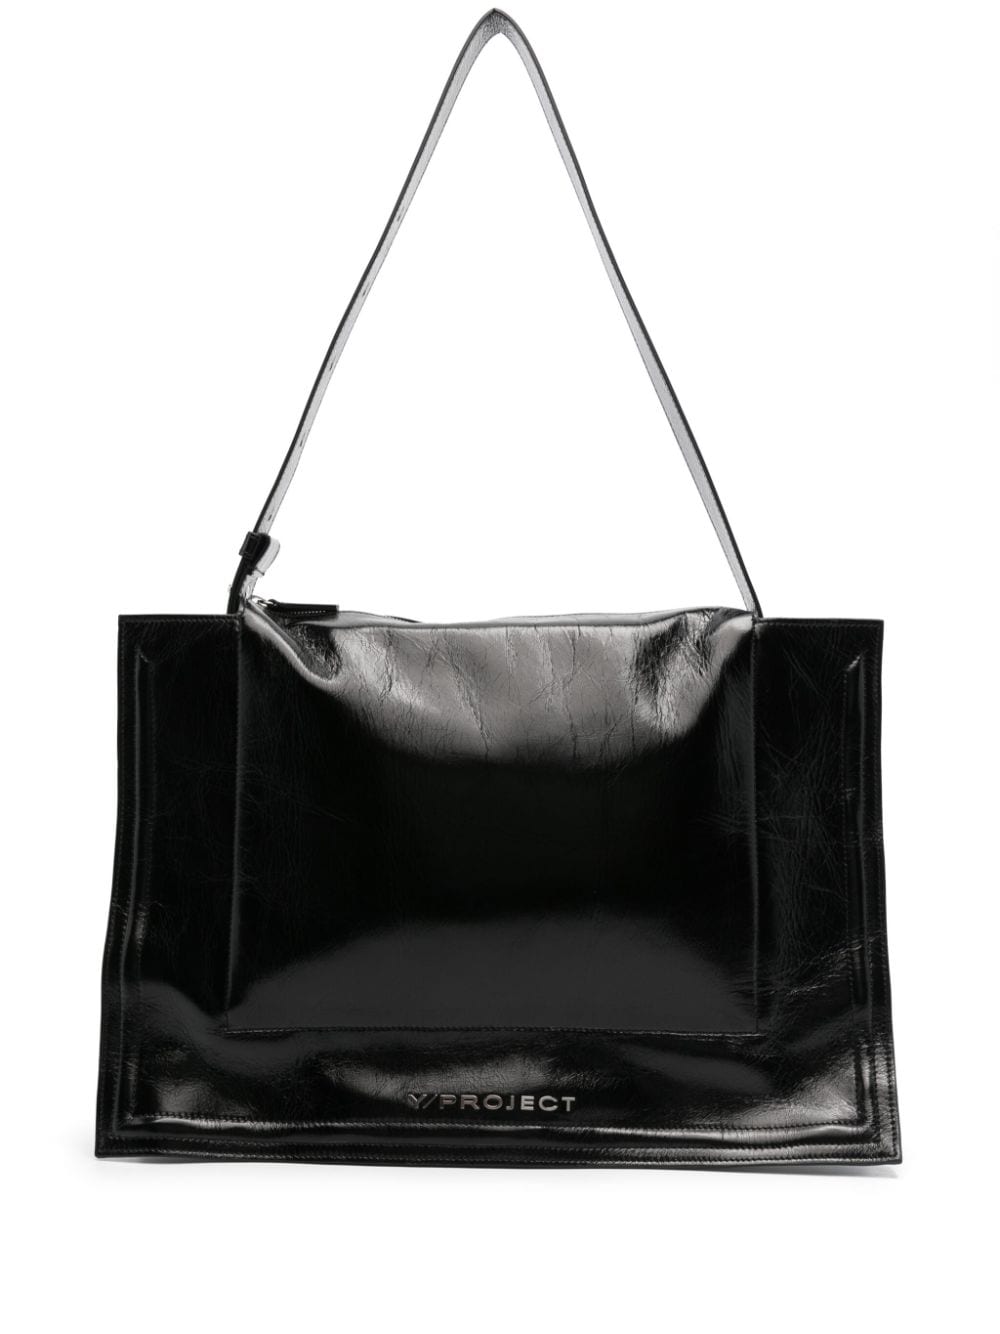 Y/PROJECT Black Leather Crossbody Bag with Crinkled Finish and Adjustable Strap